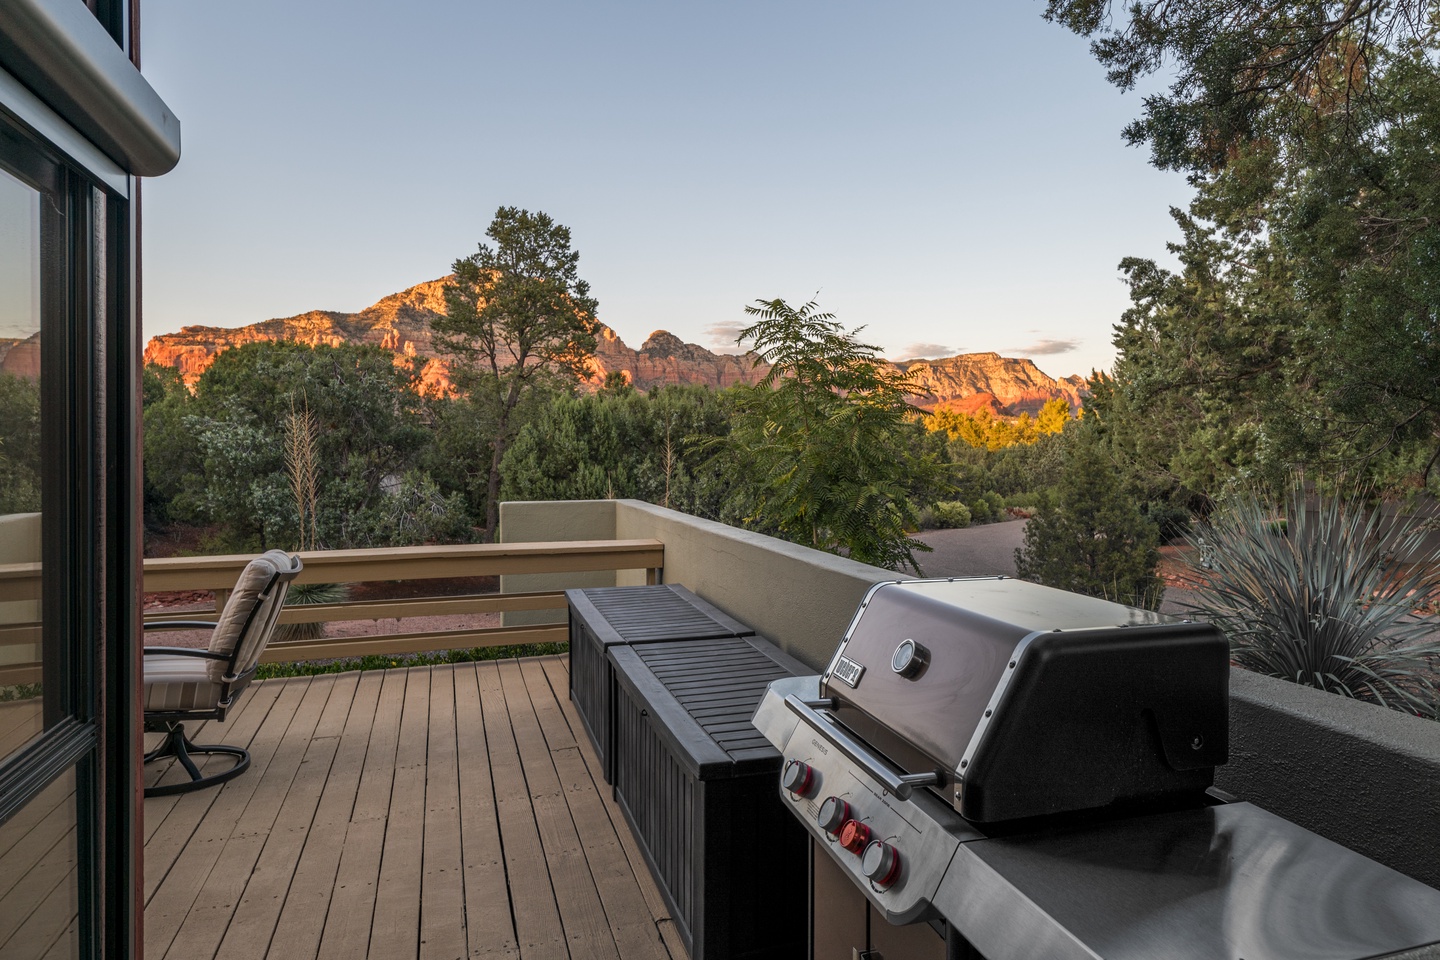 Grill amongst the red rocks